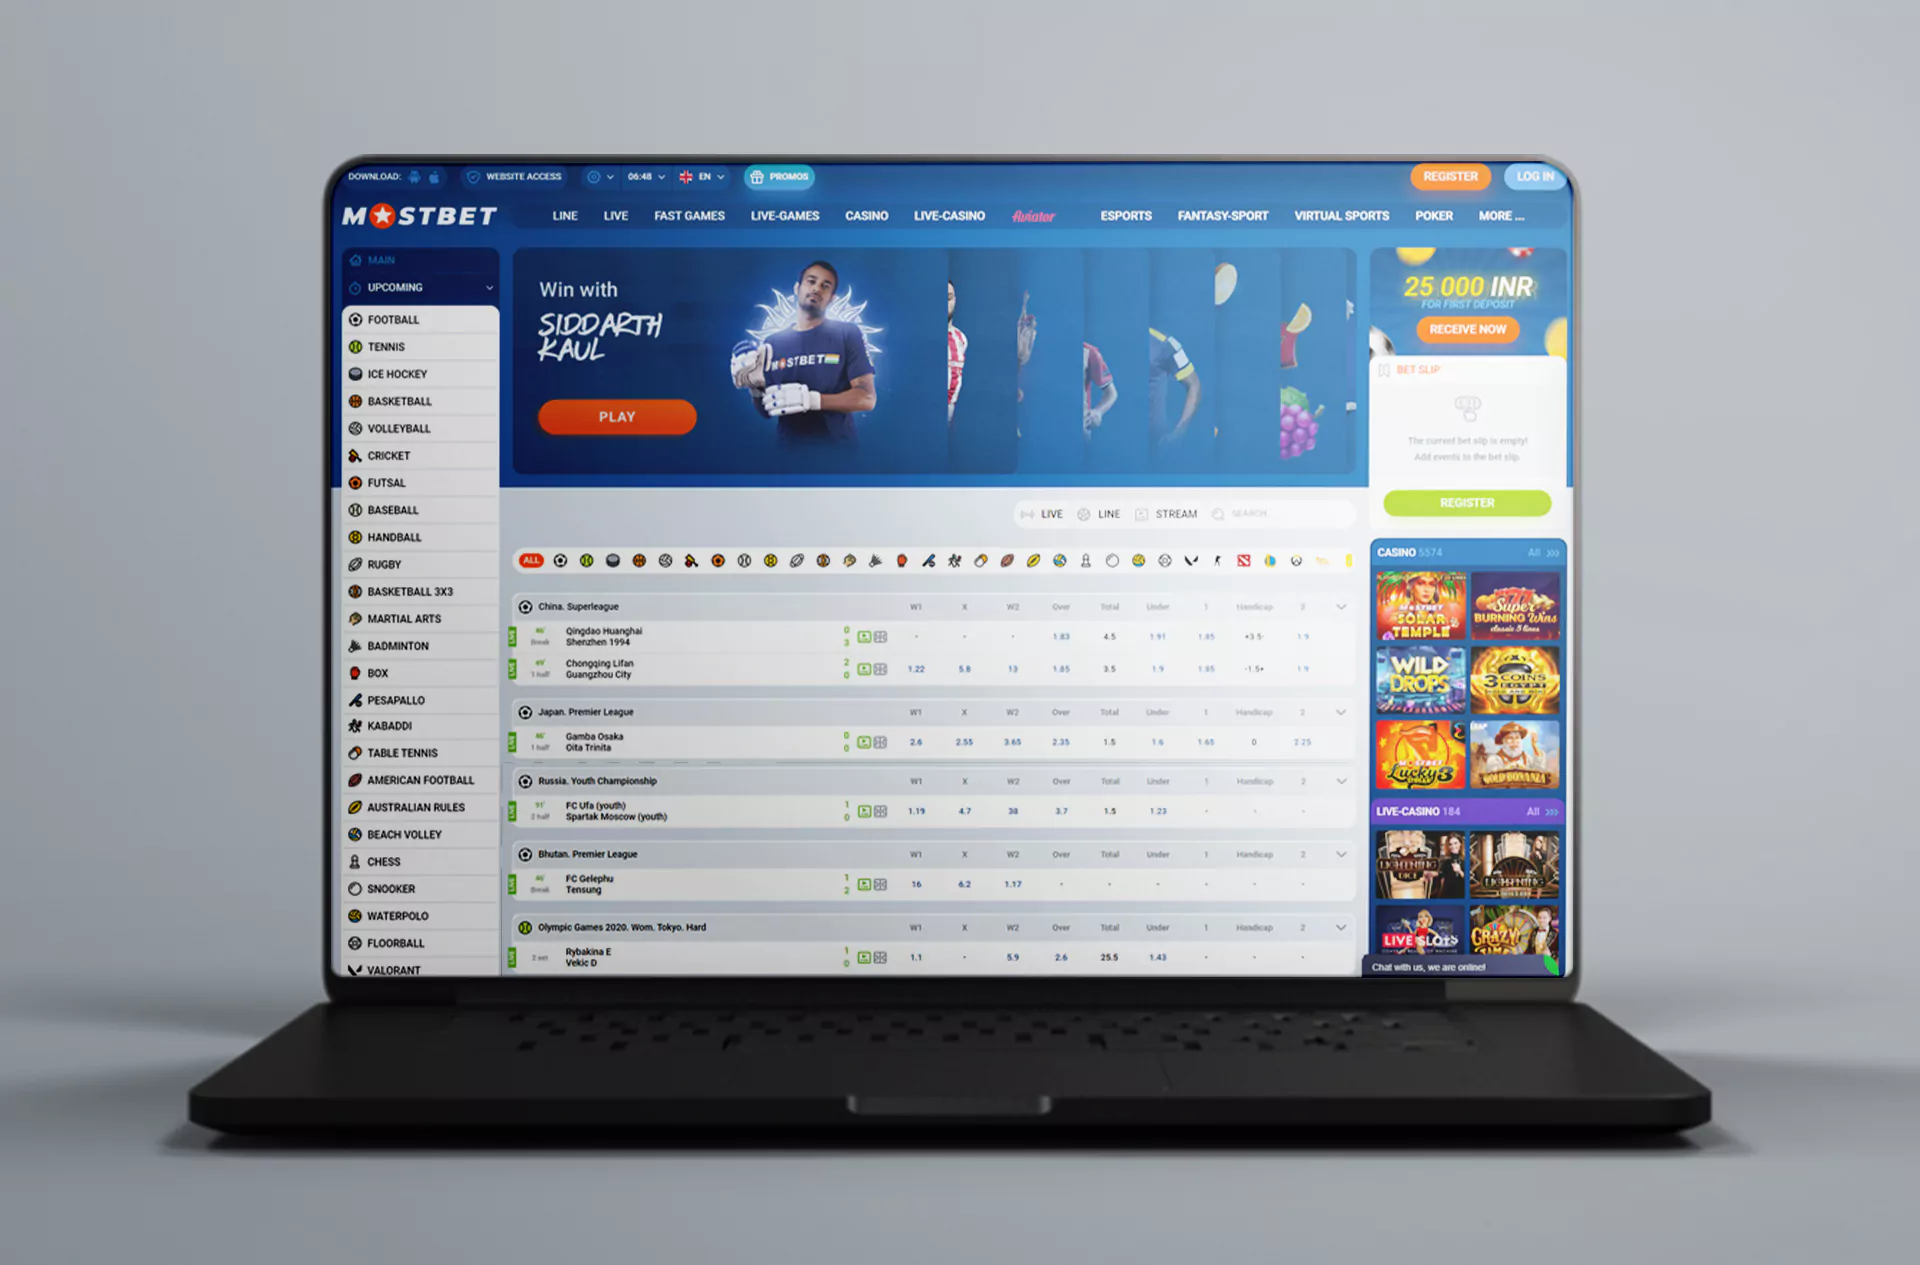 Go to the official website of Mostbet.